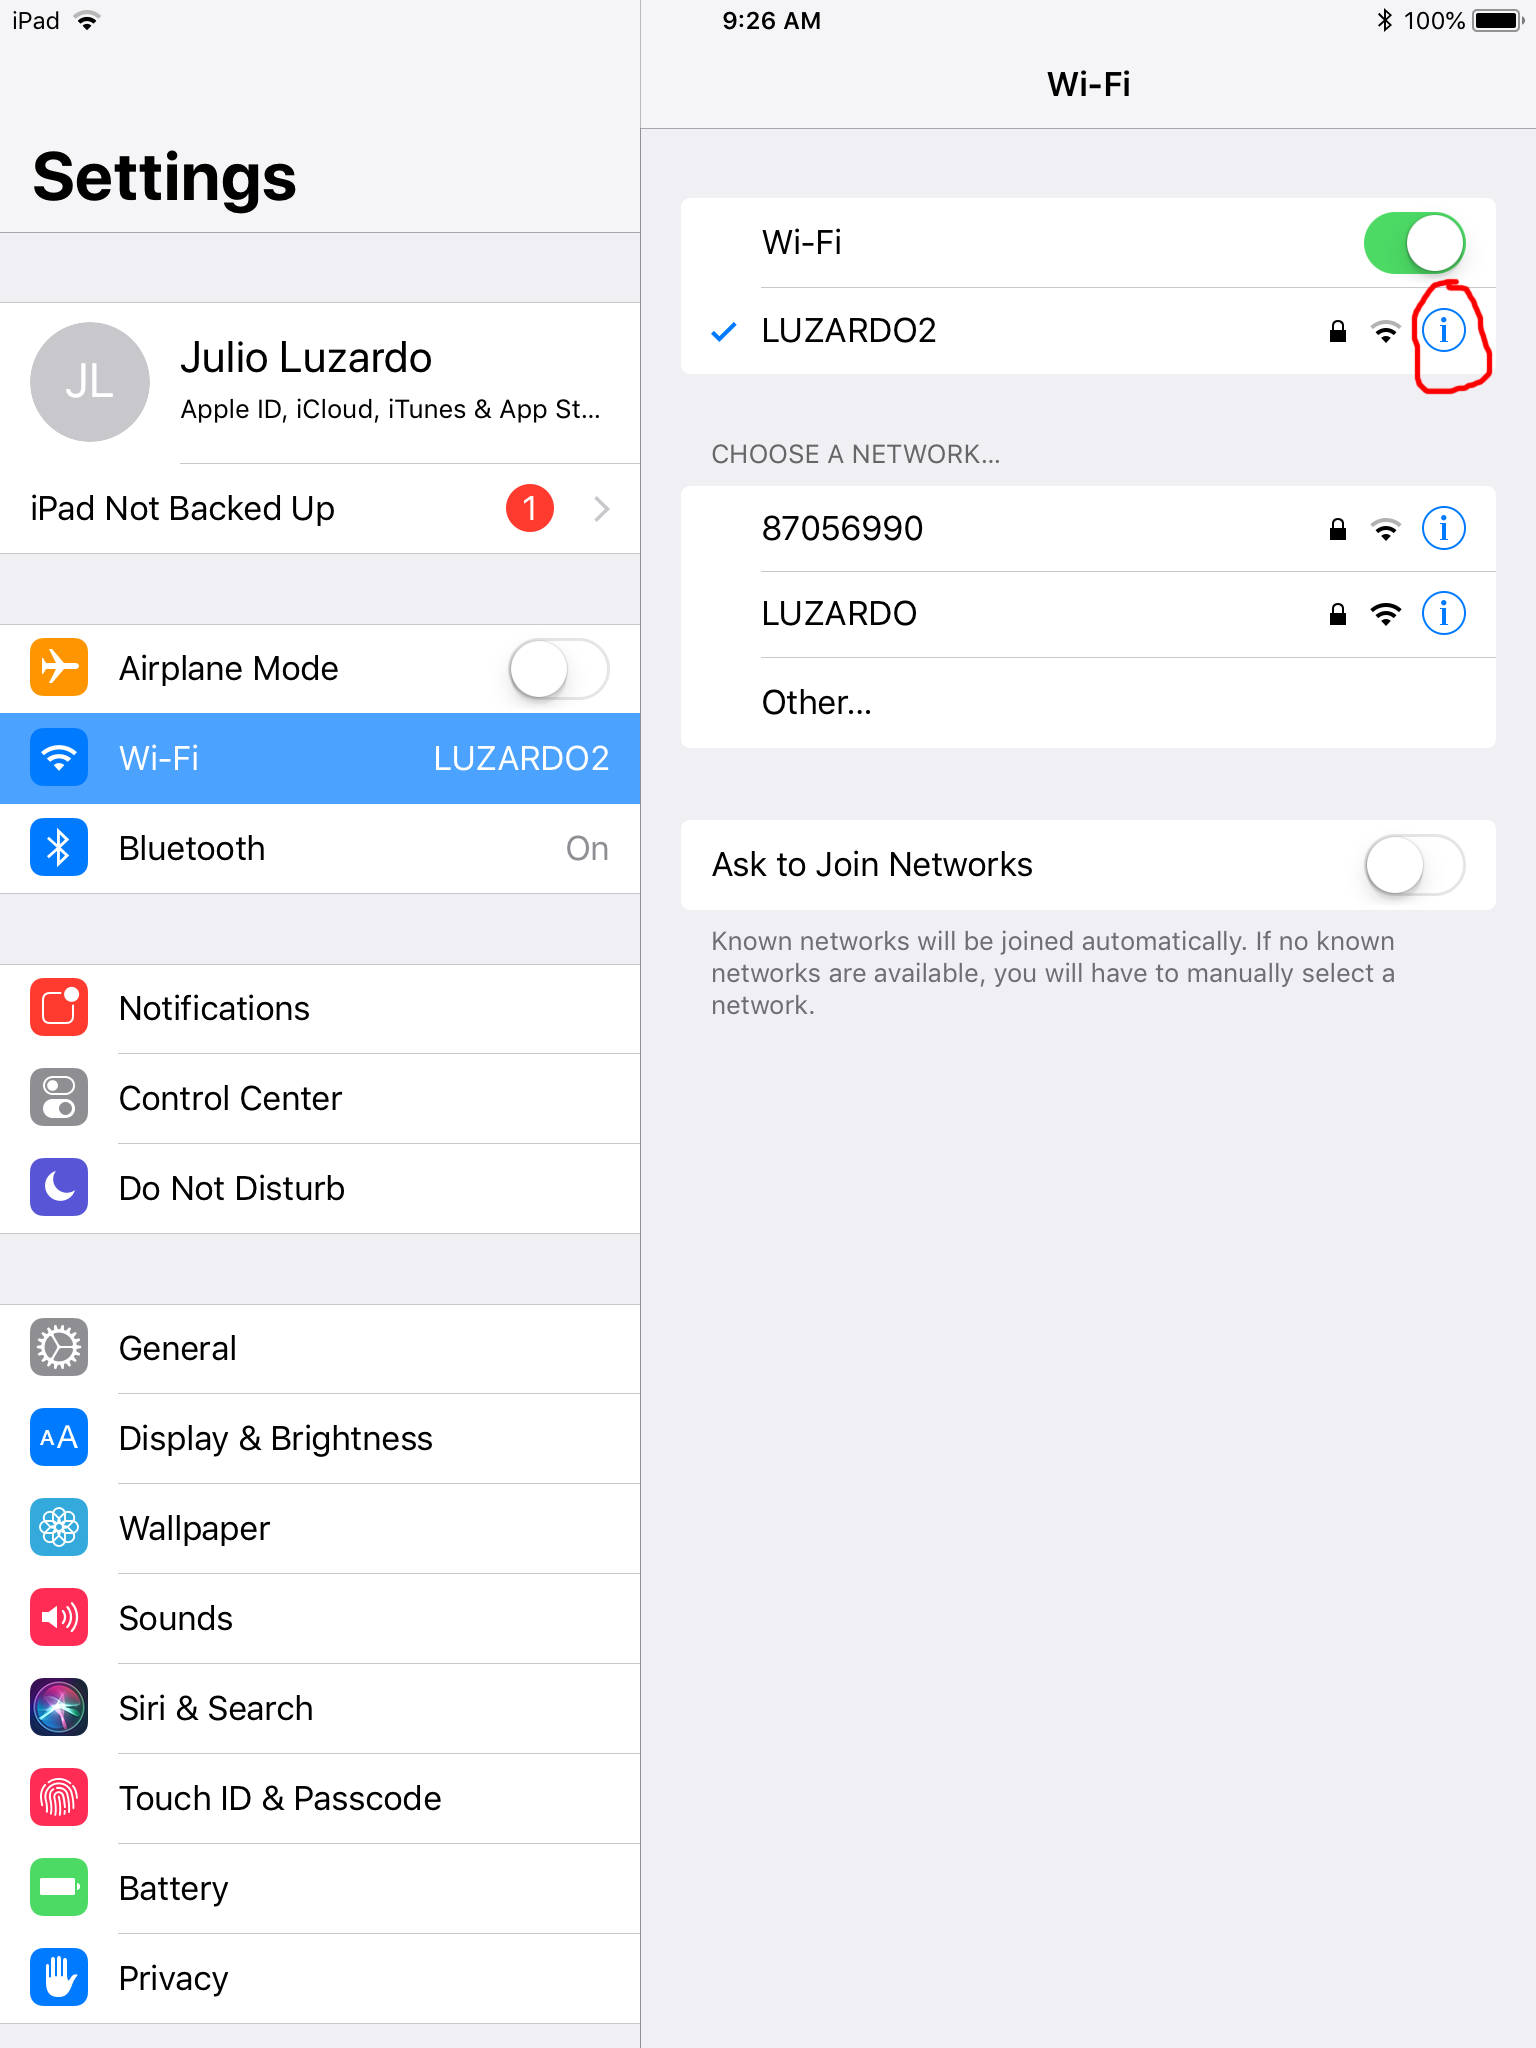 Tap on the i icon of your Wi-Fi network